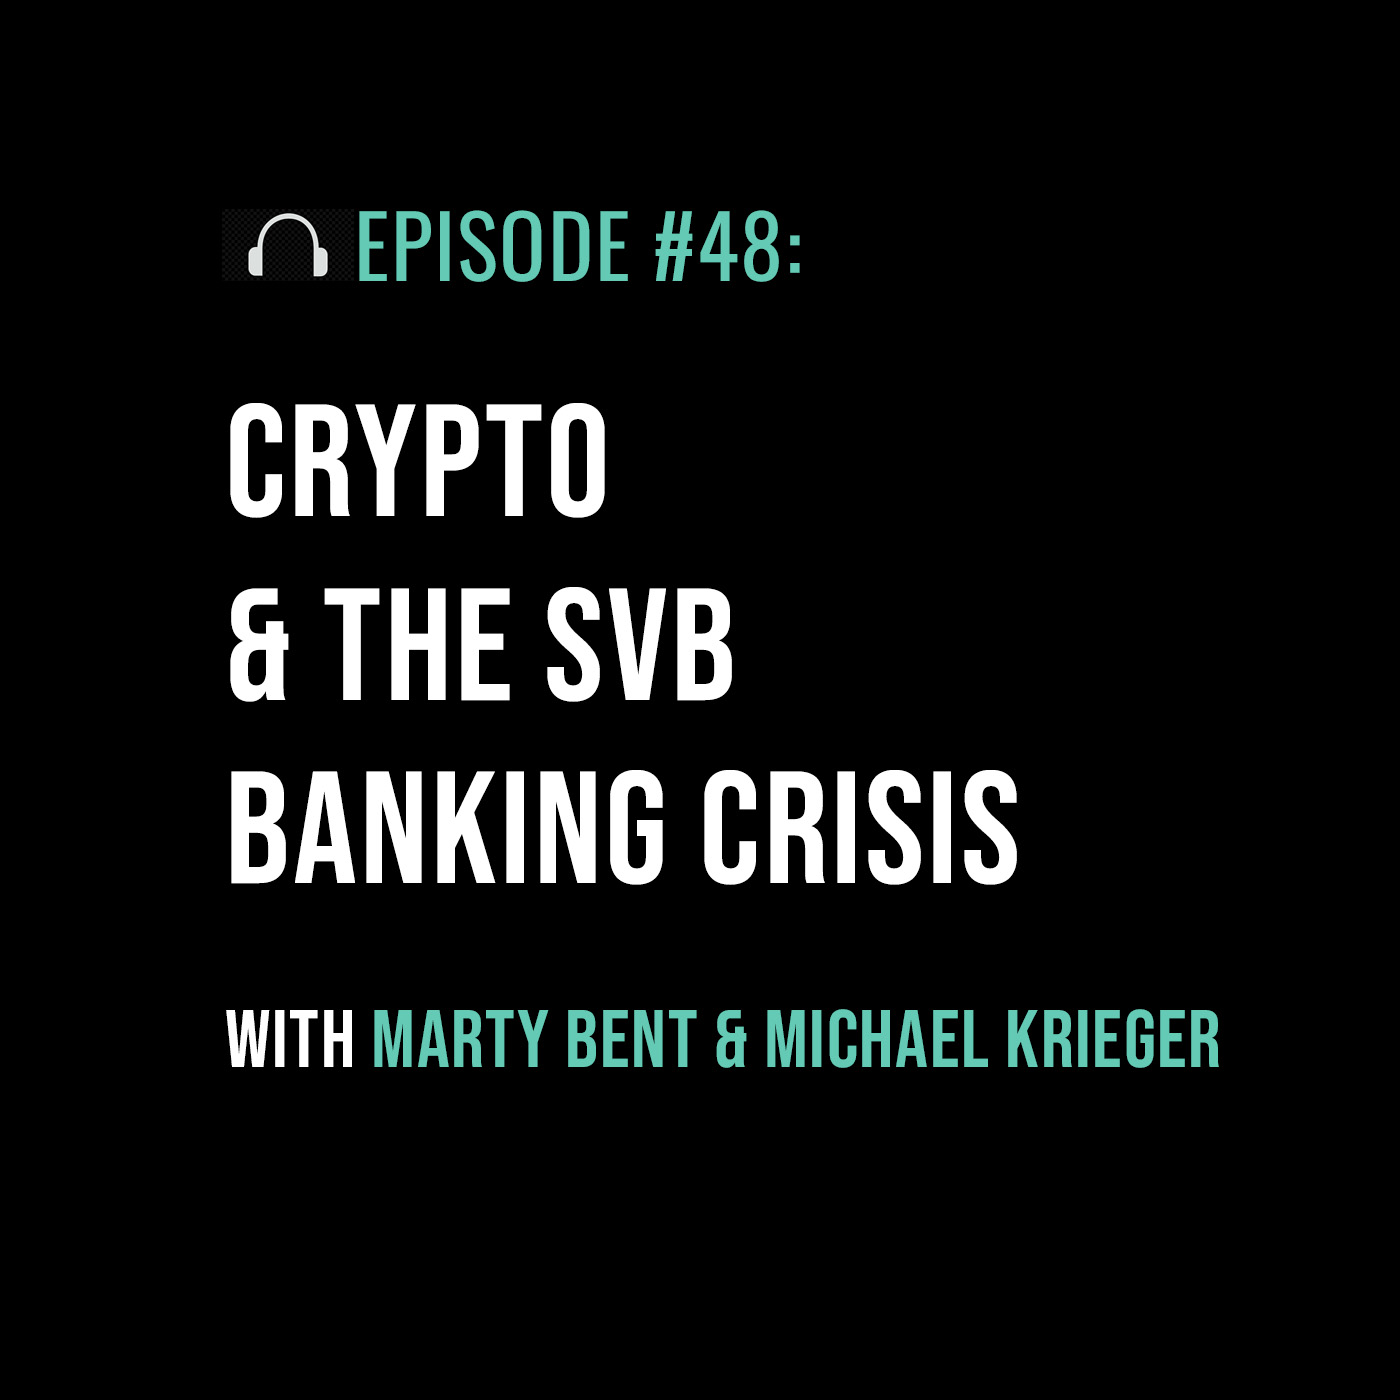 Crypto & the SVB Banking Crisis with Marty Bent & Michael Krieger